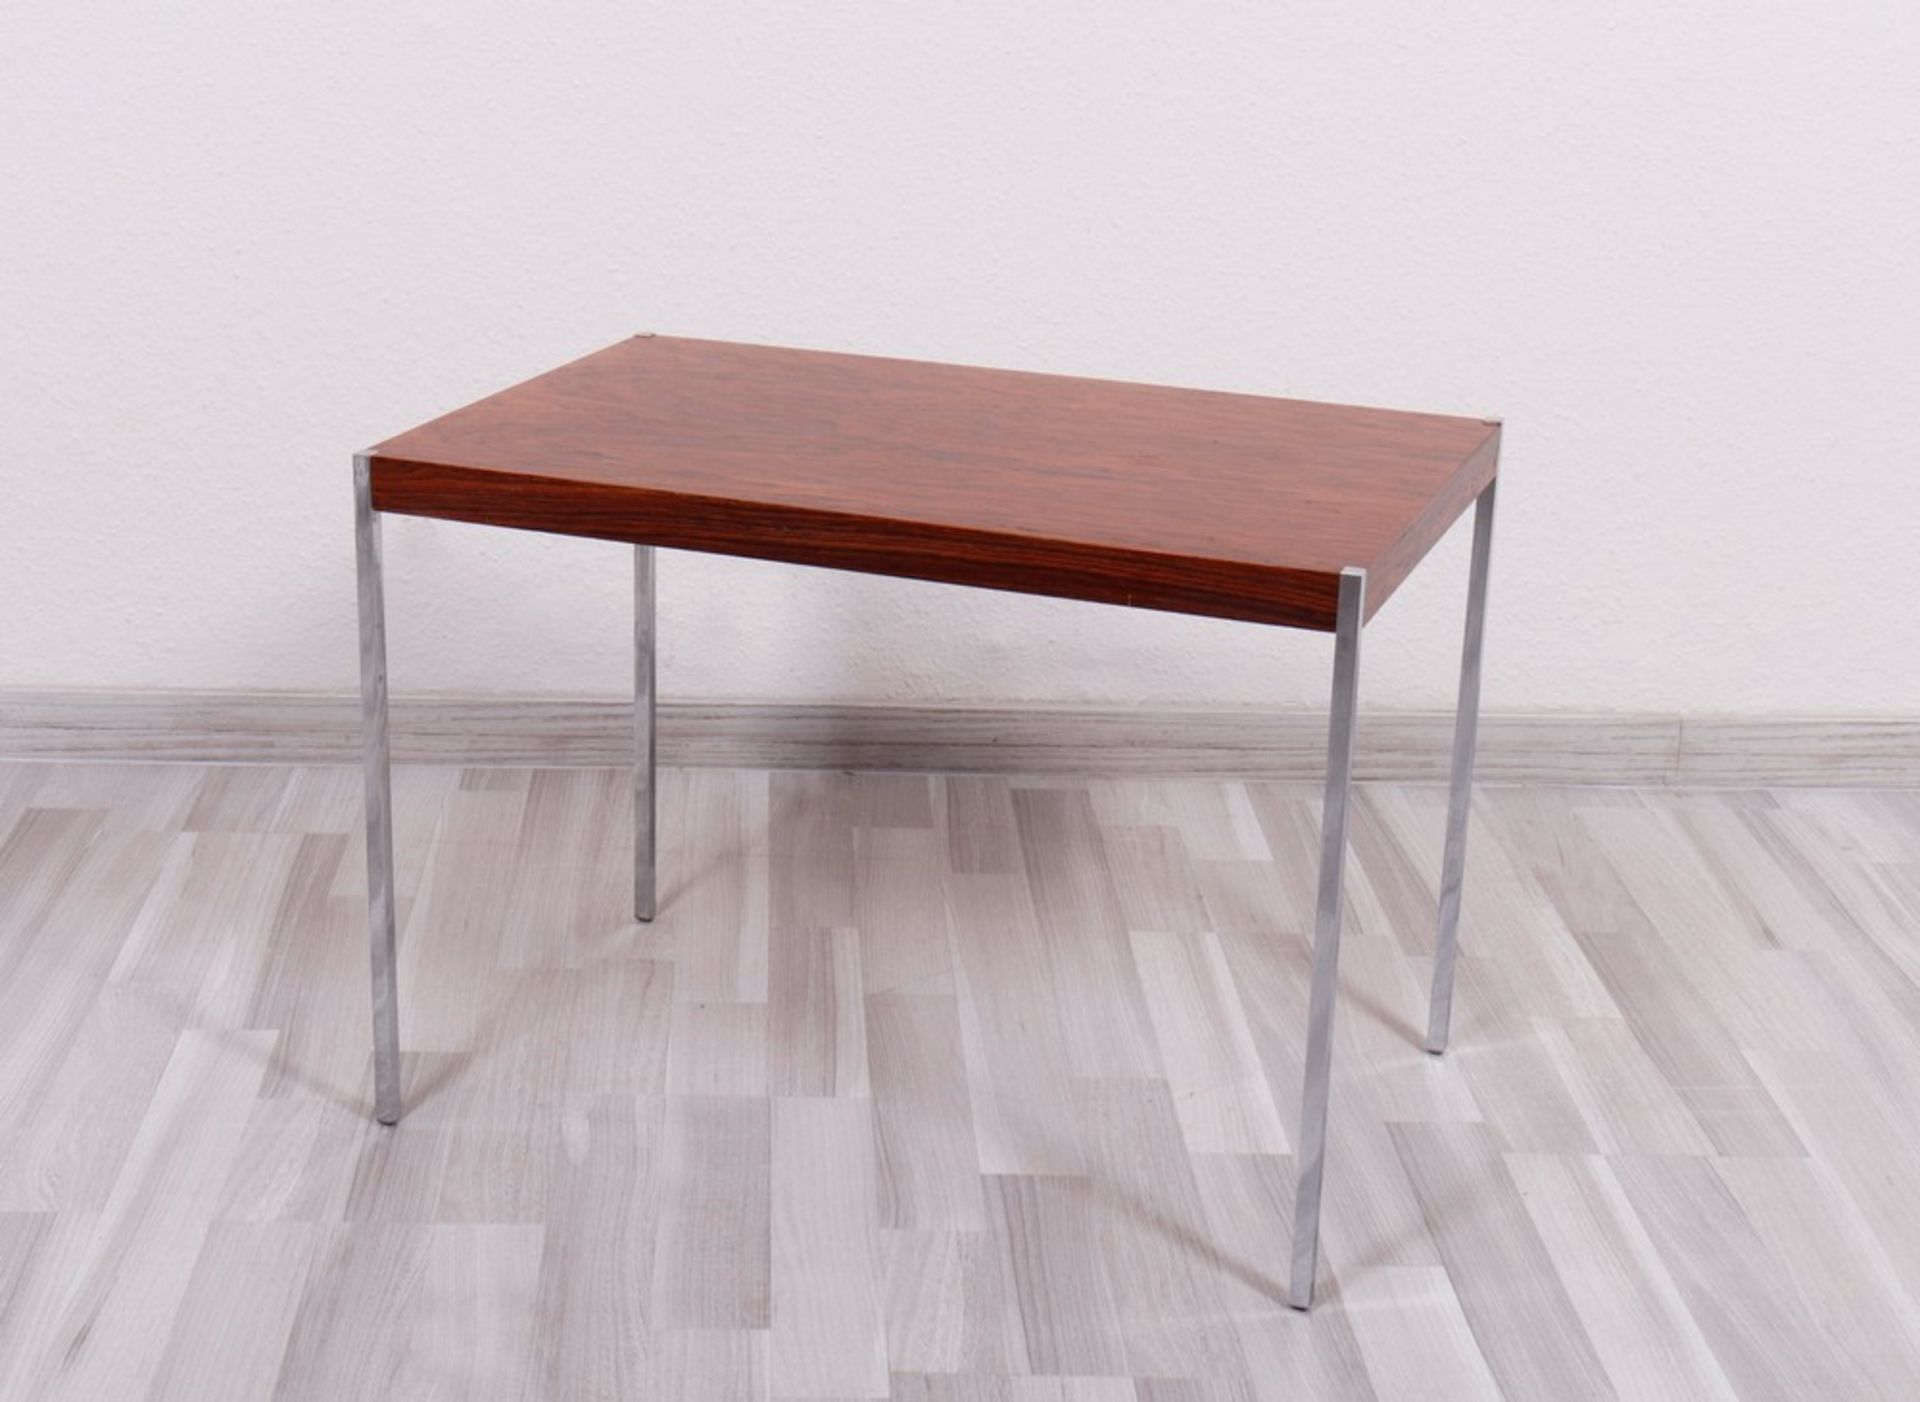 Small side table, probably Denmark, c. 1960